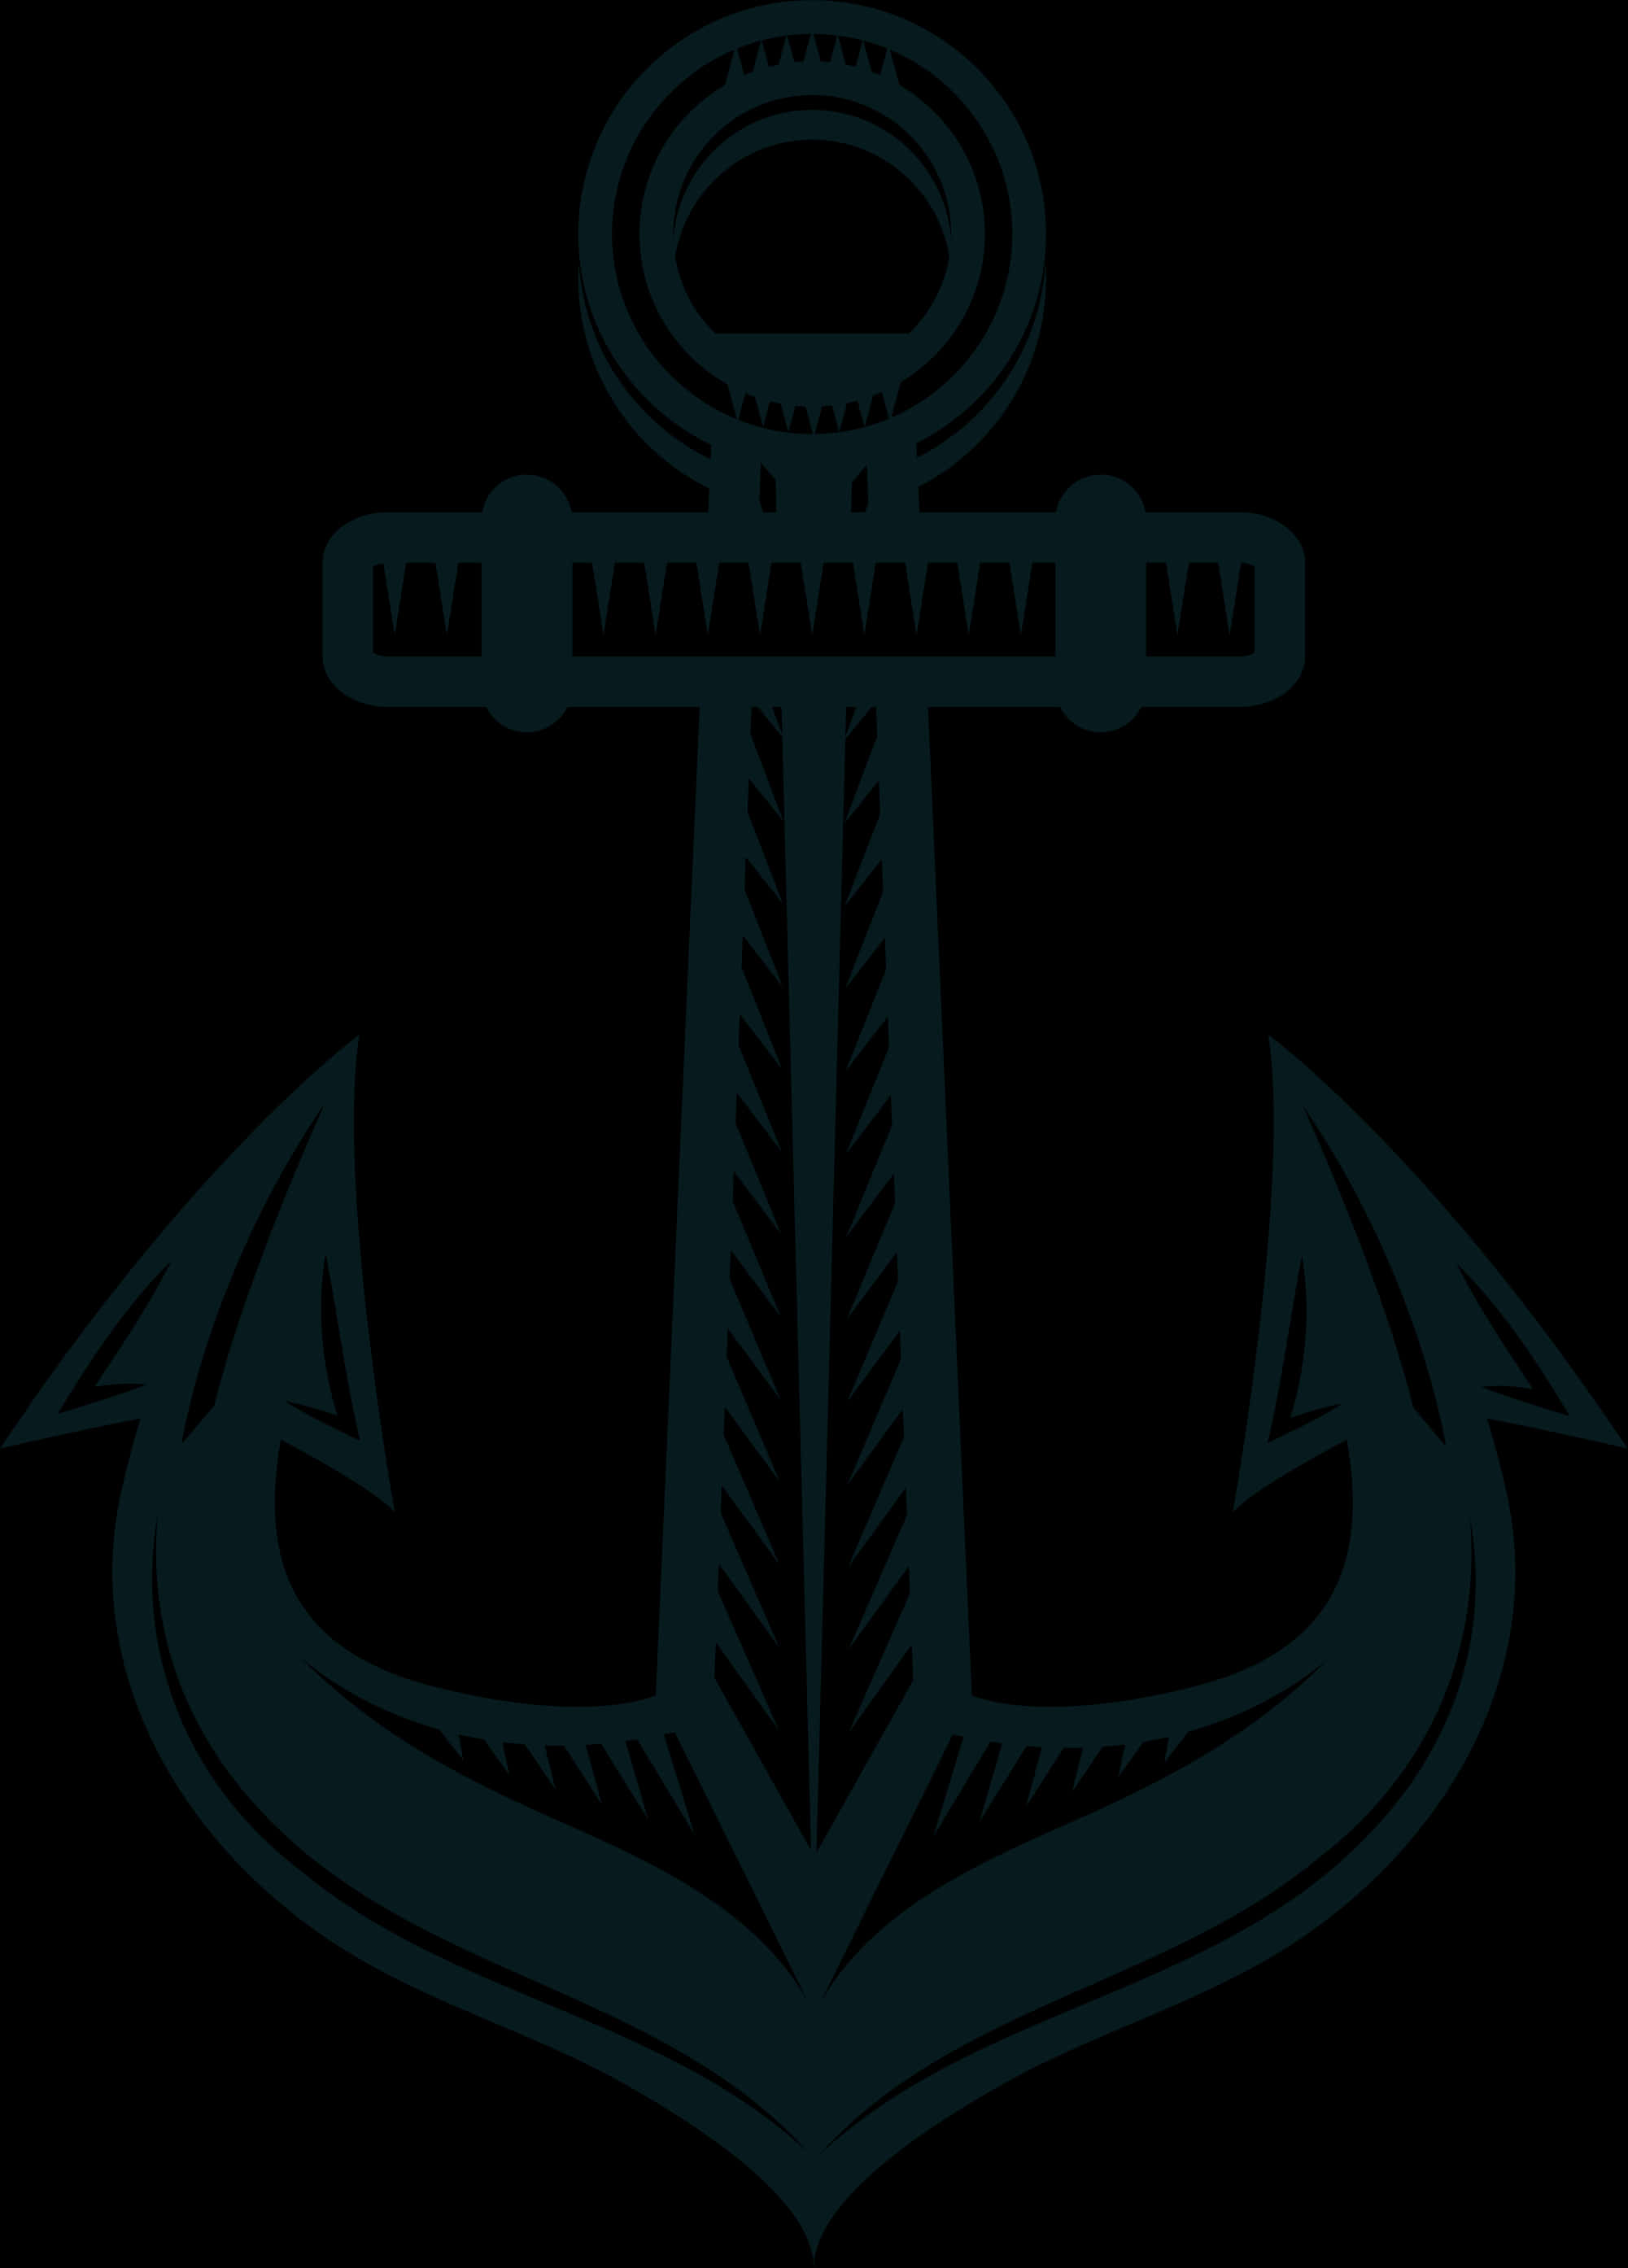 Nautical Anchor Graphic PNG image